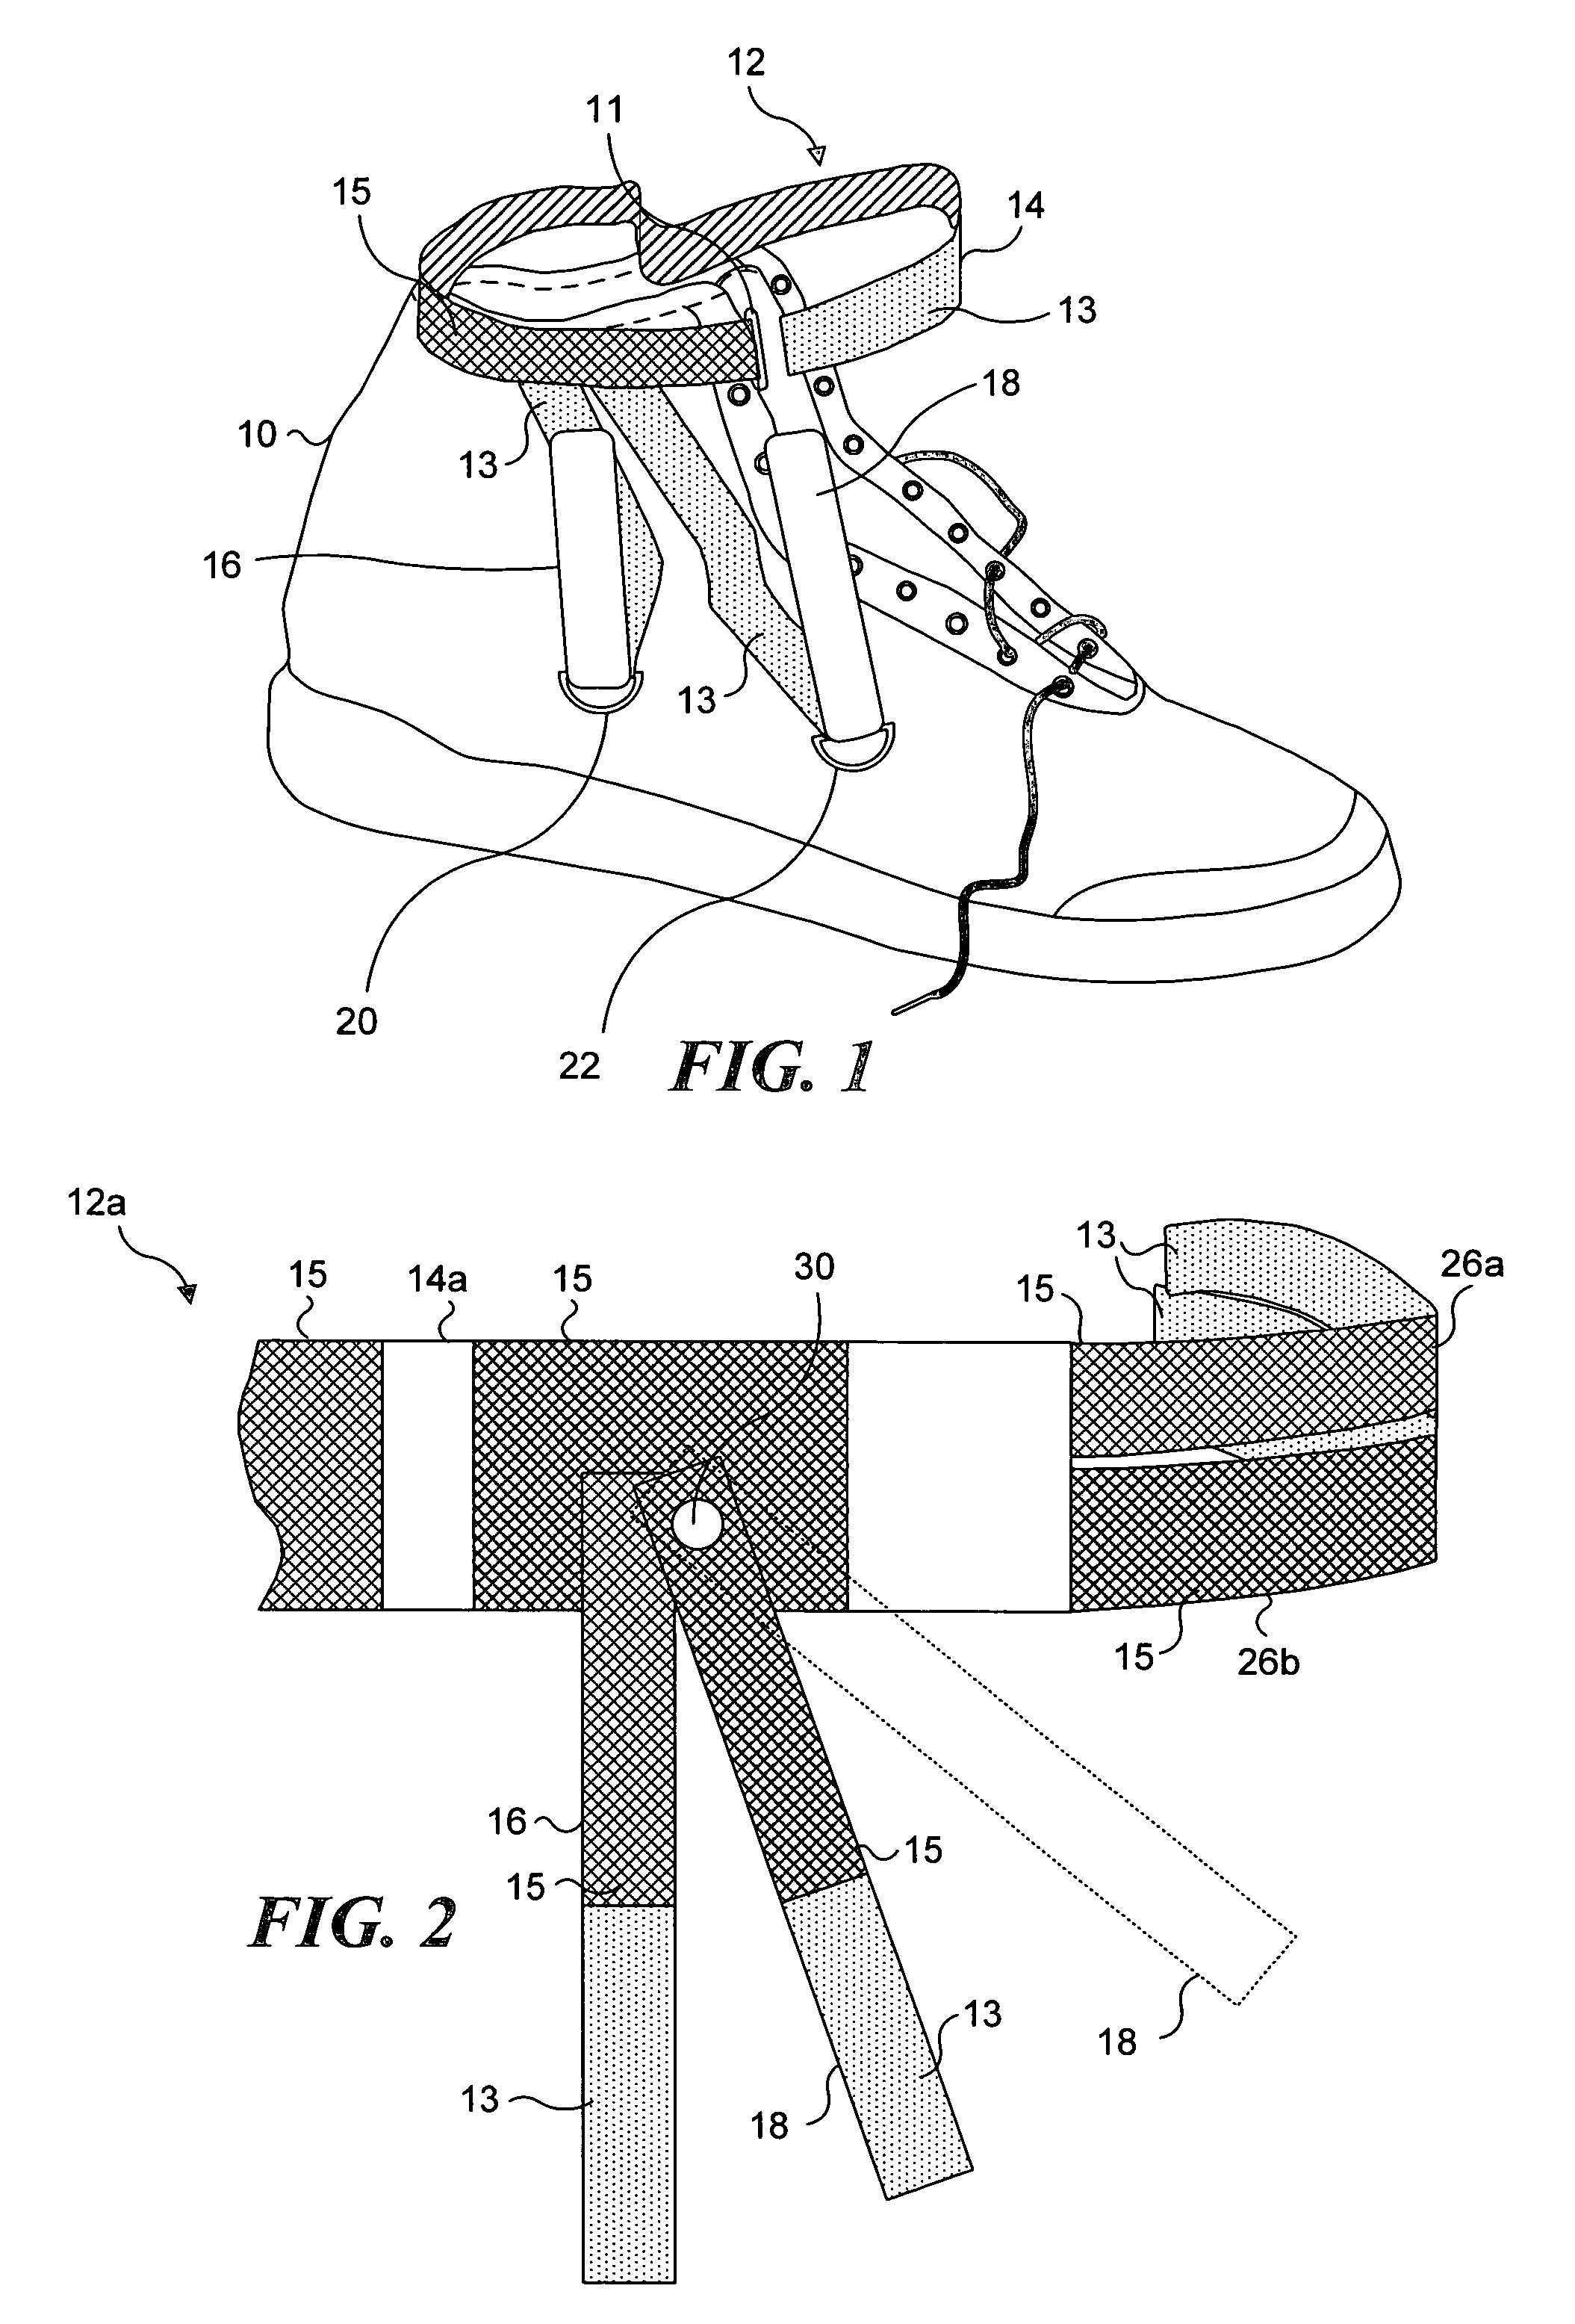 Ankle and foot stabilization support